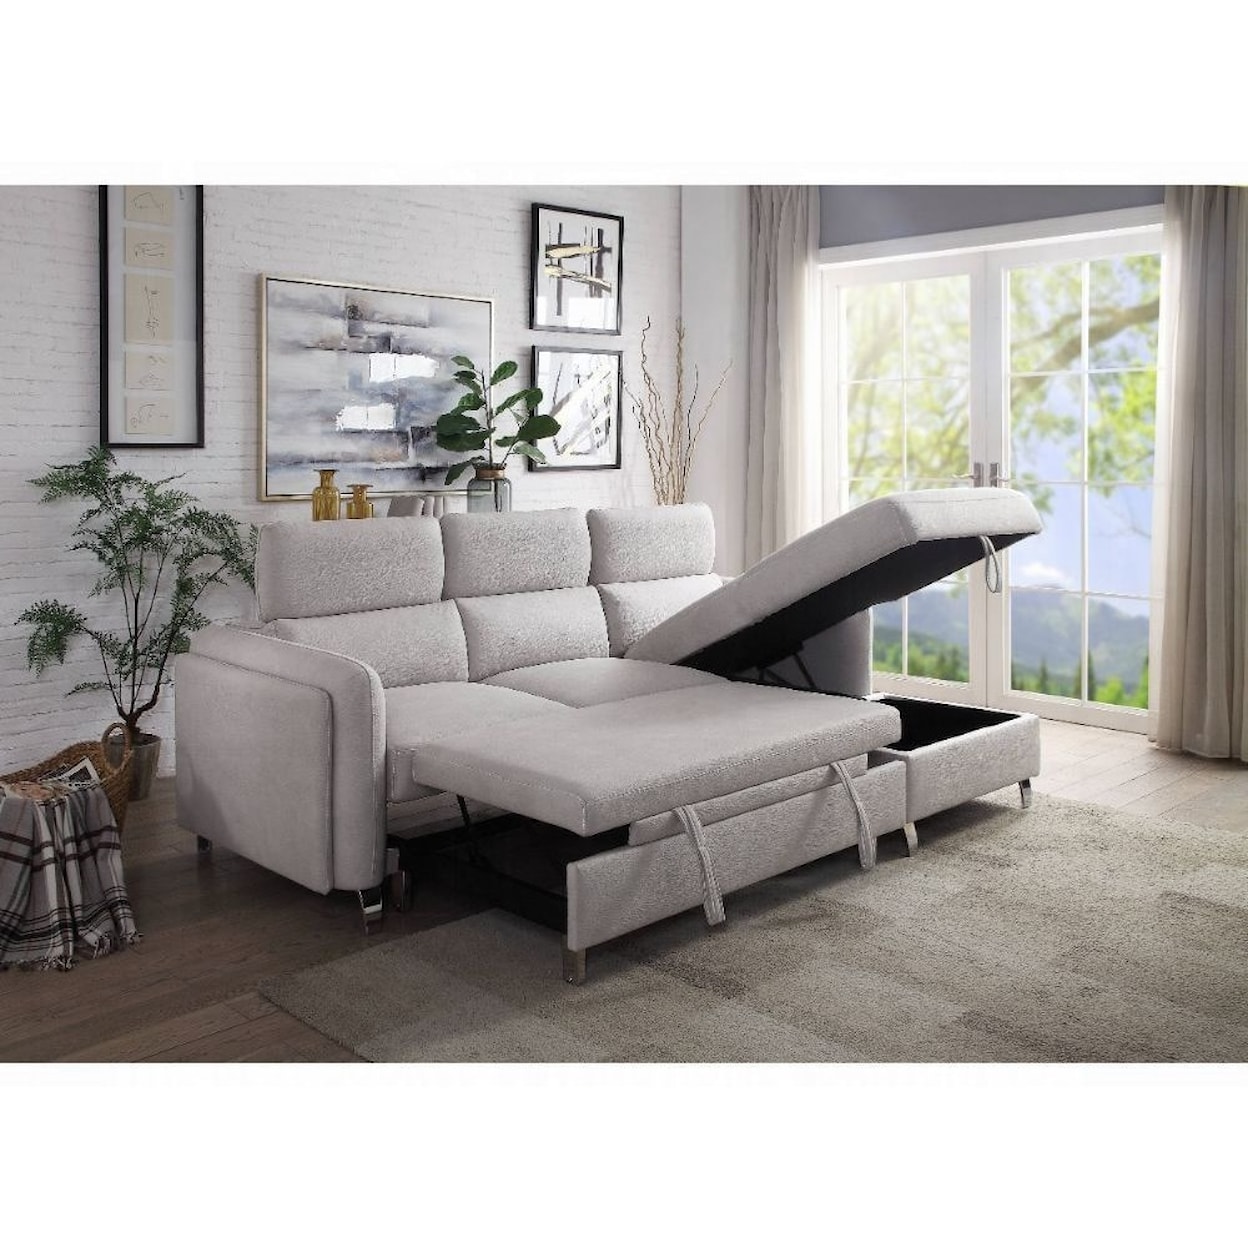 Acme Furniture Reyes Sectional Sofa with Sleeper